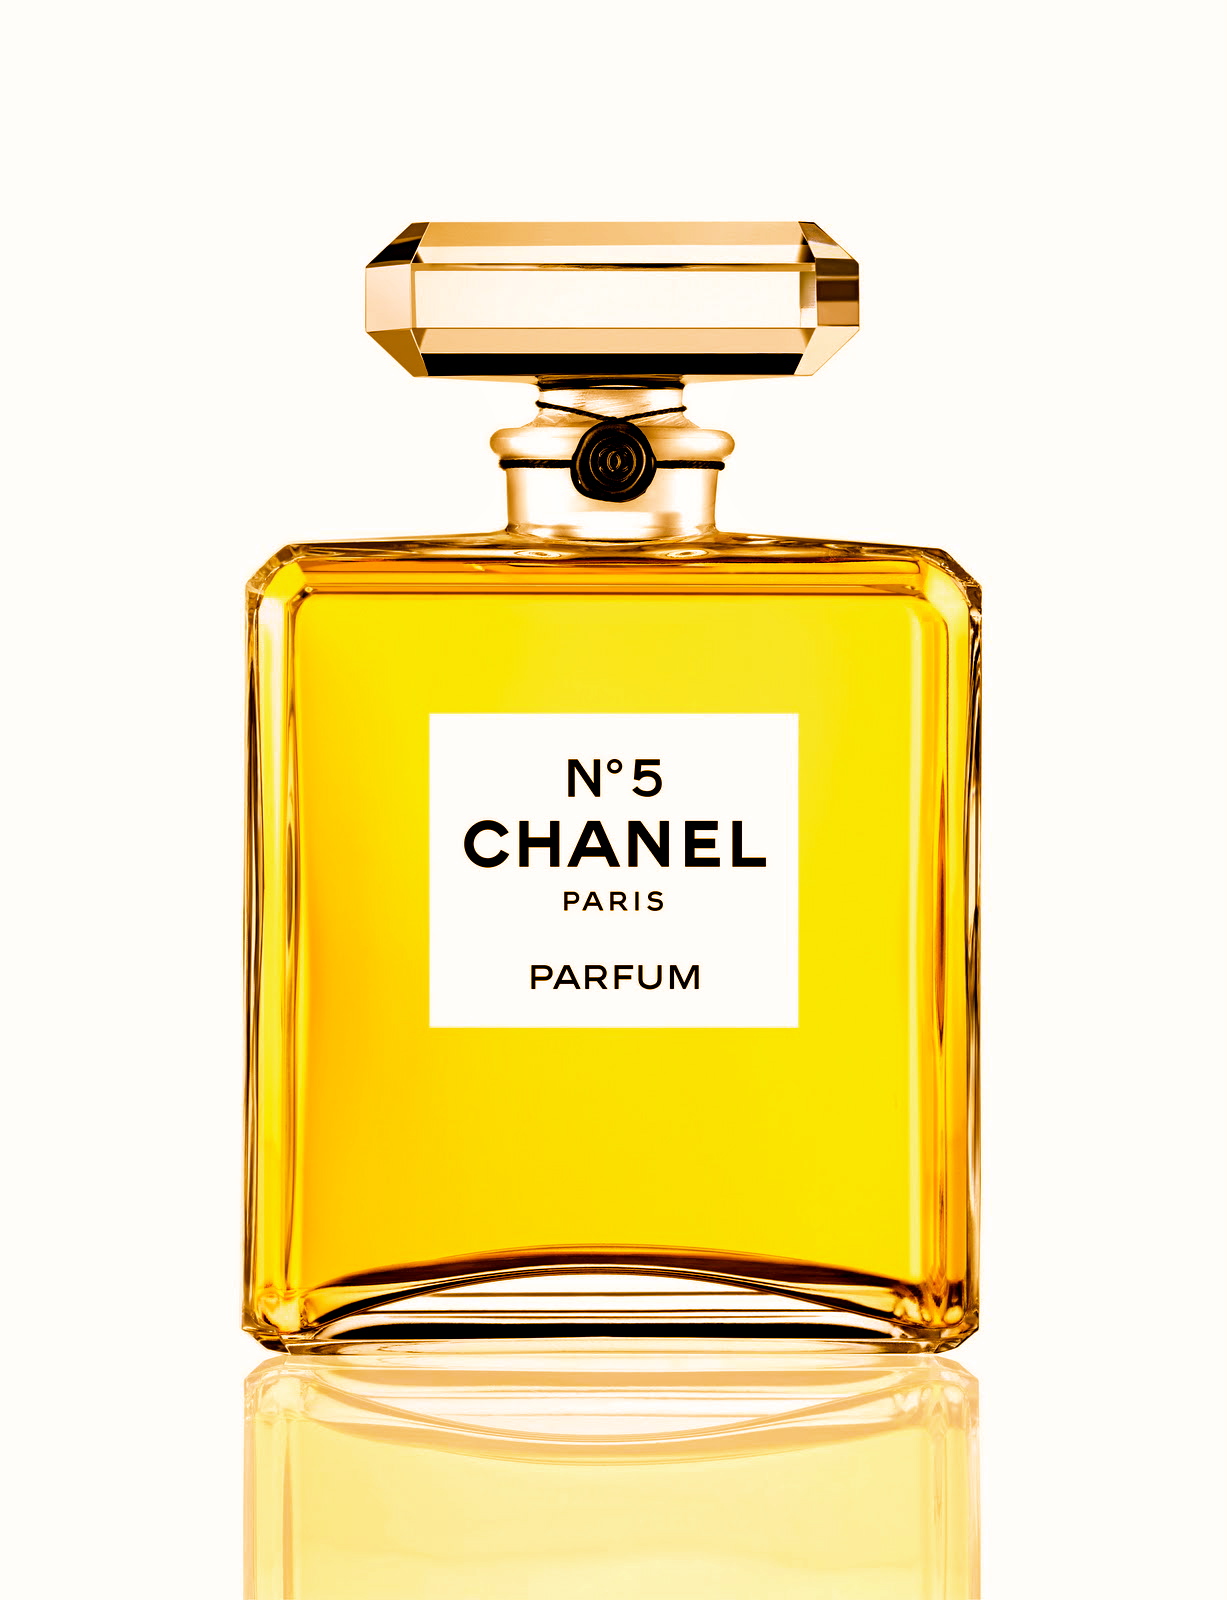 Giselle named new face of Chanel No. 5!, Gregory Dylan Beauty